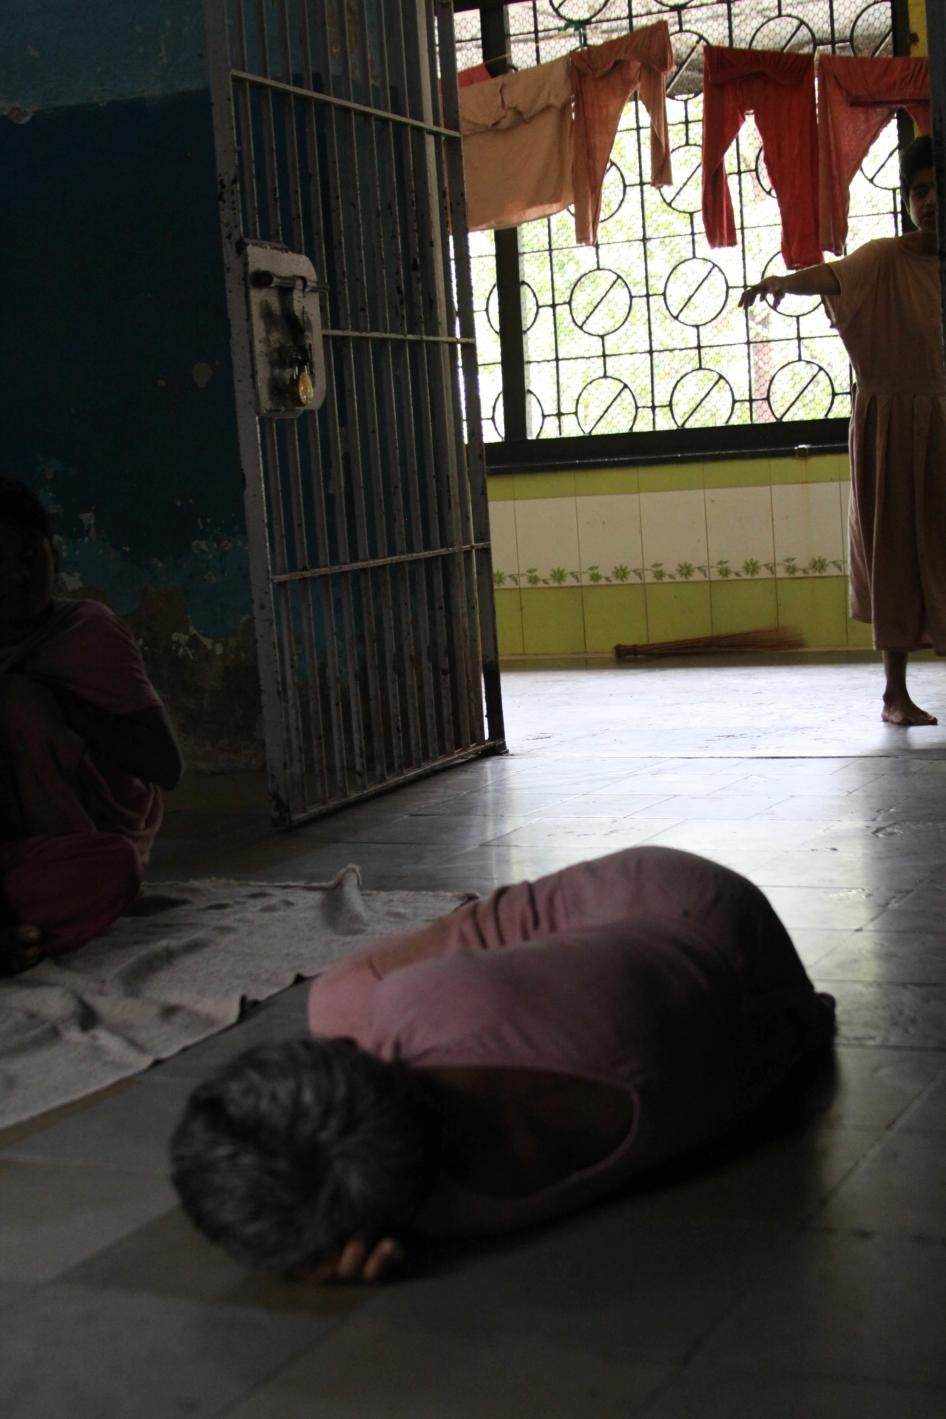 A woman in a pink dress lying on the floor of a room or cell.